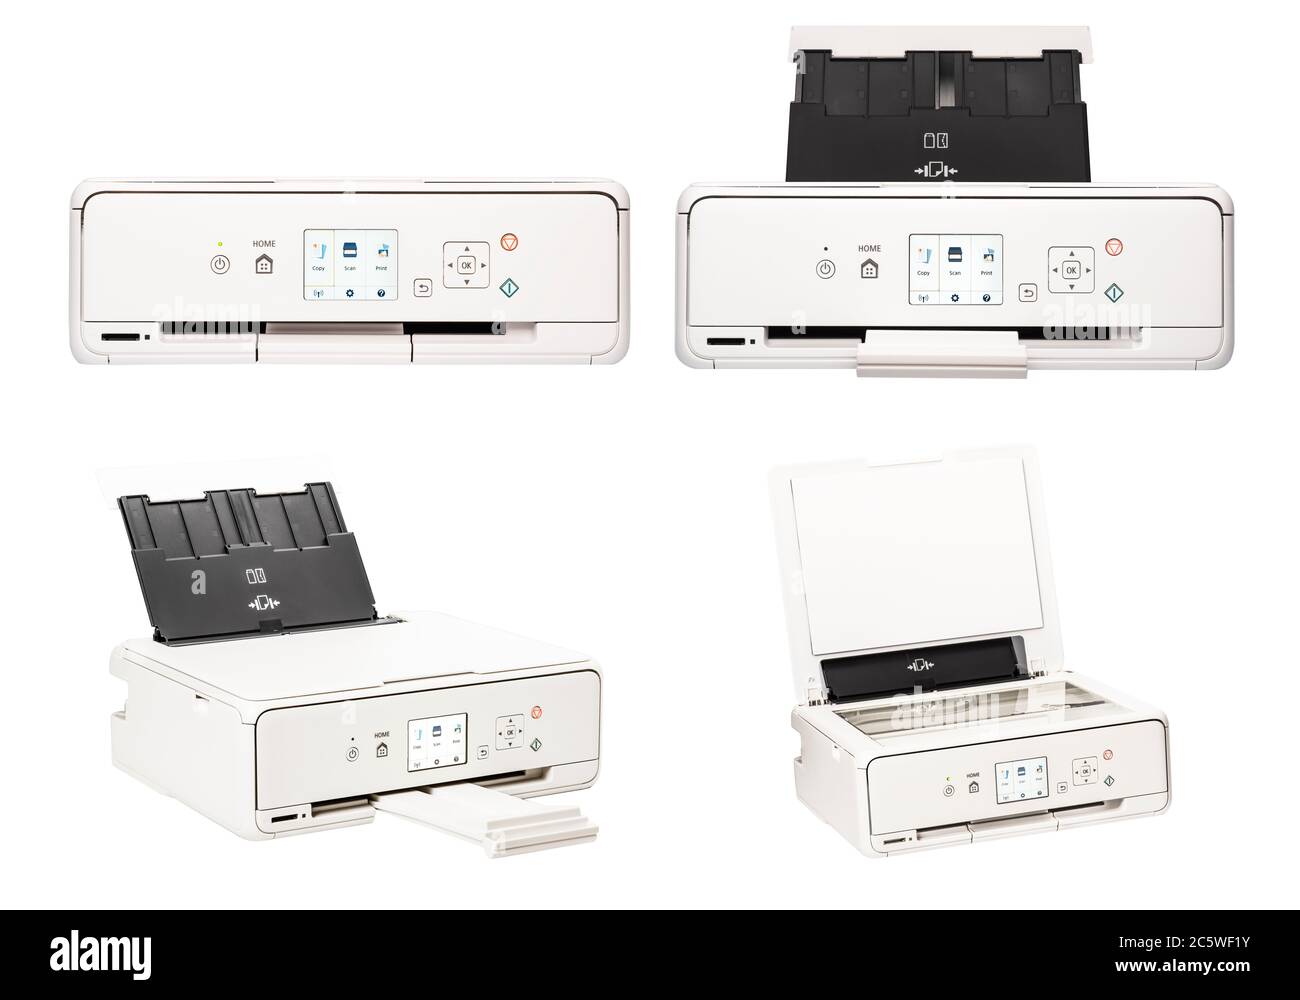 Printer scanner copier home office desktop All-in-One wireless inkjet  printer in various configurations and views. Clipping Work Path Included in  JPEG Stock Photo - Alamy